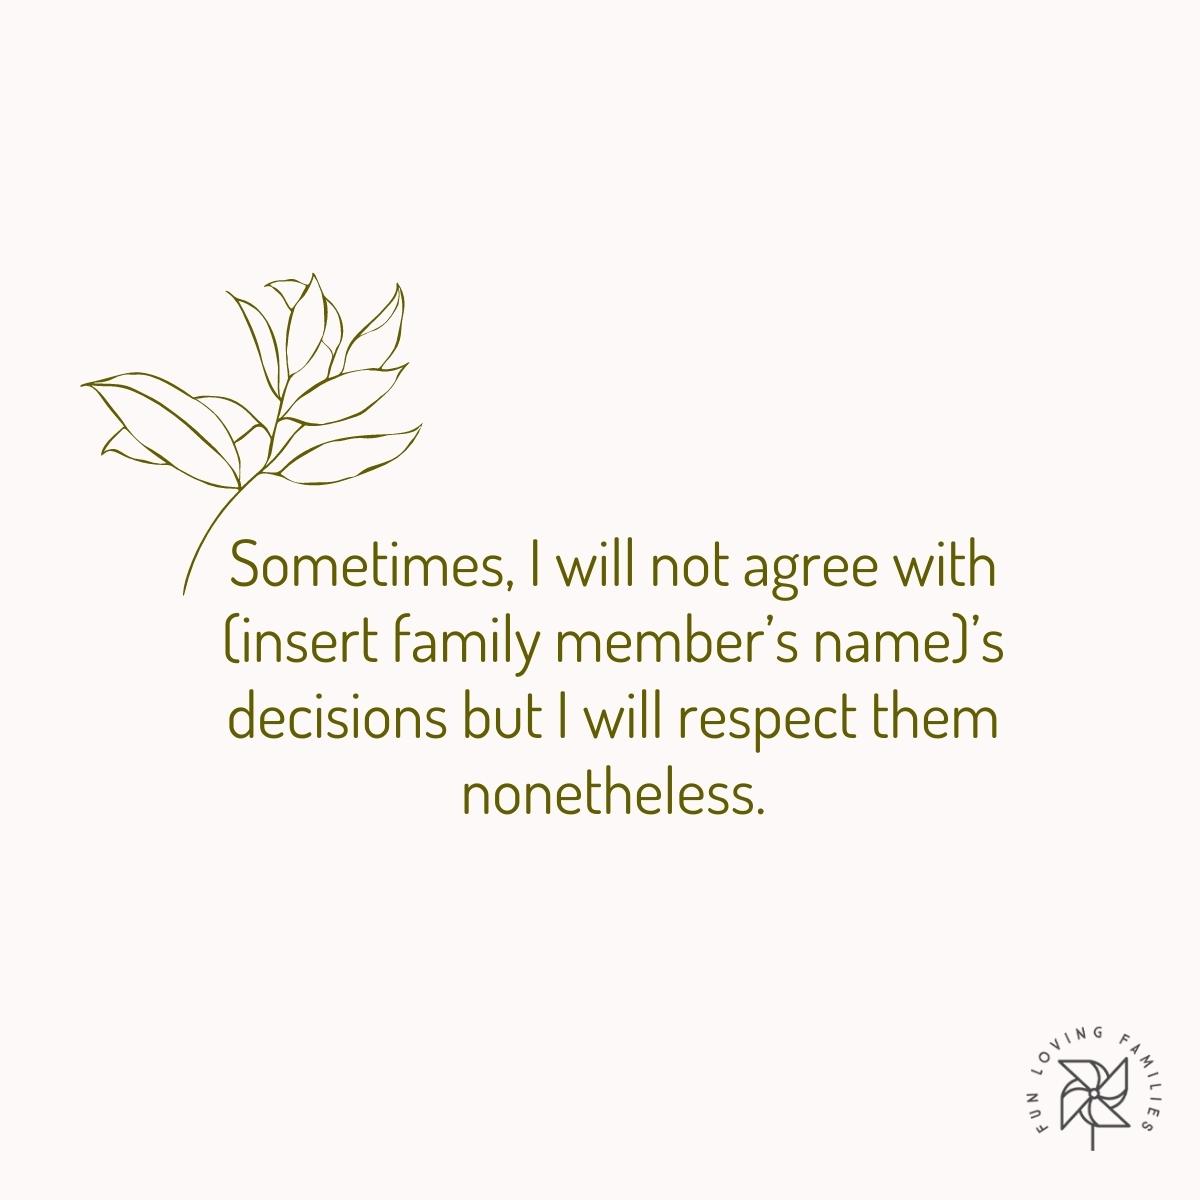 Sometimes, I will not agree with  decisions affirmation